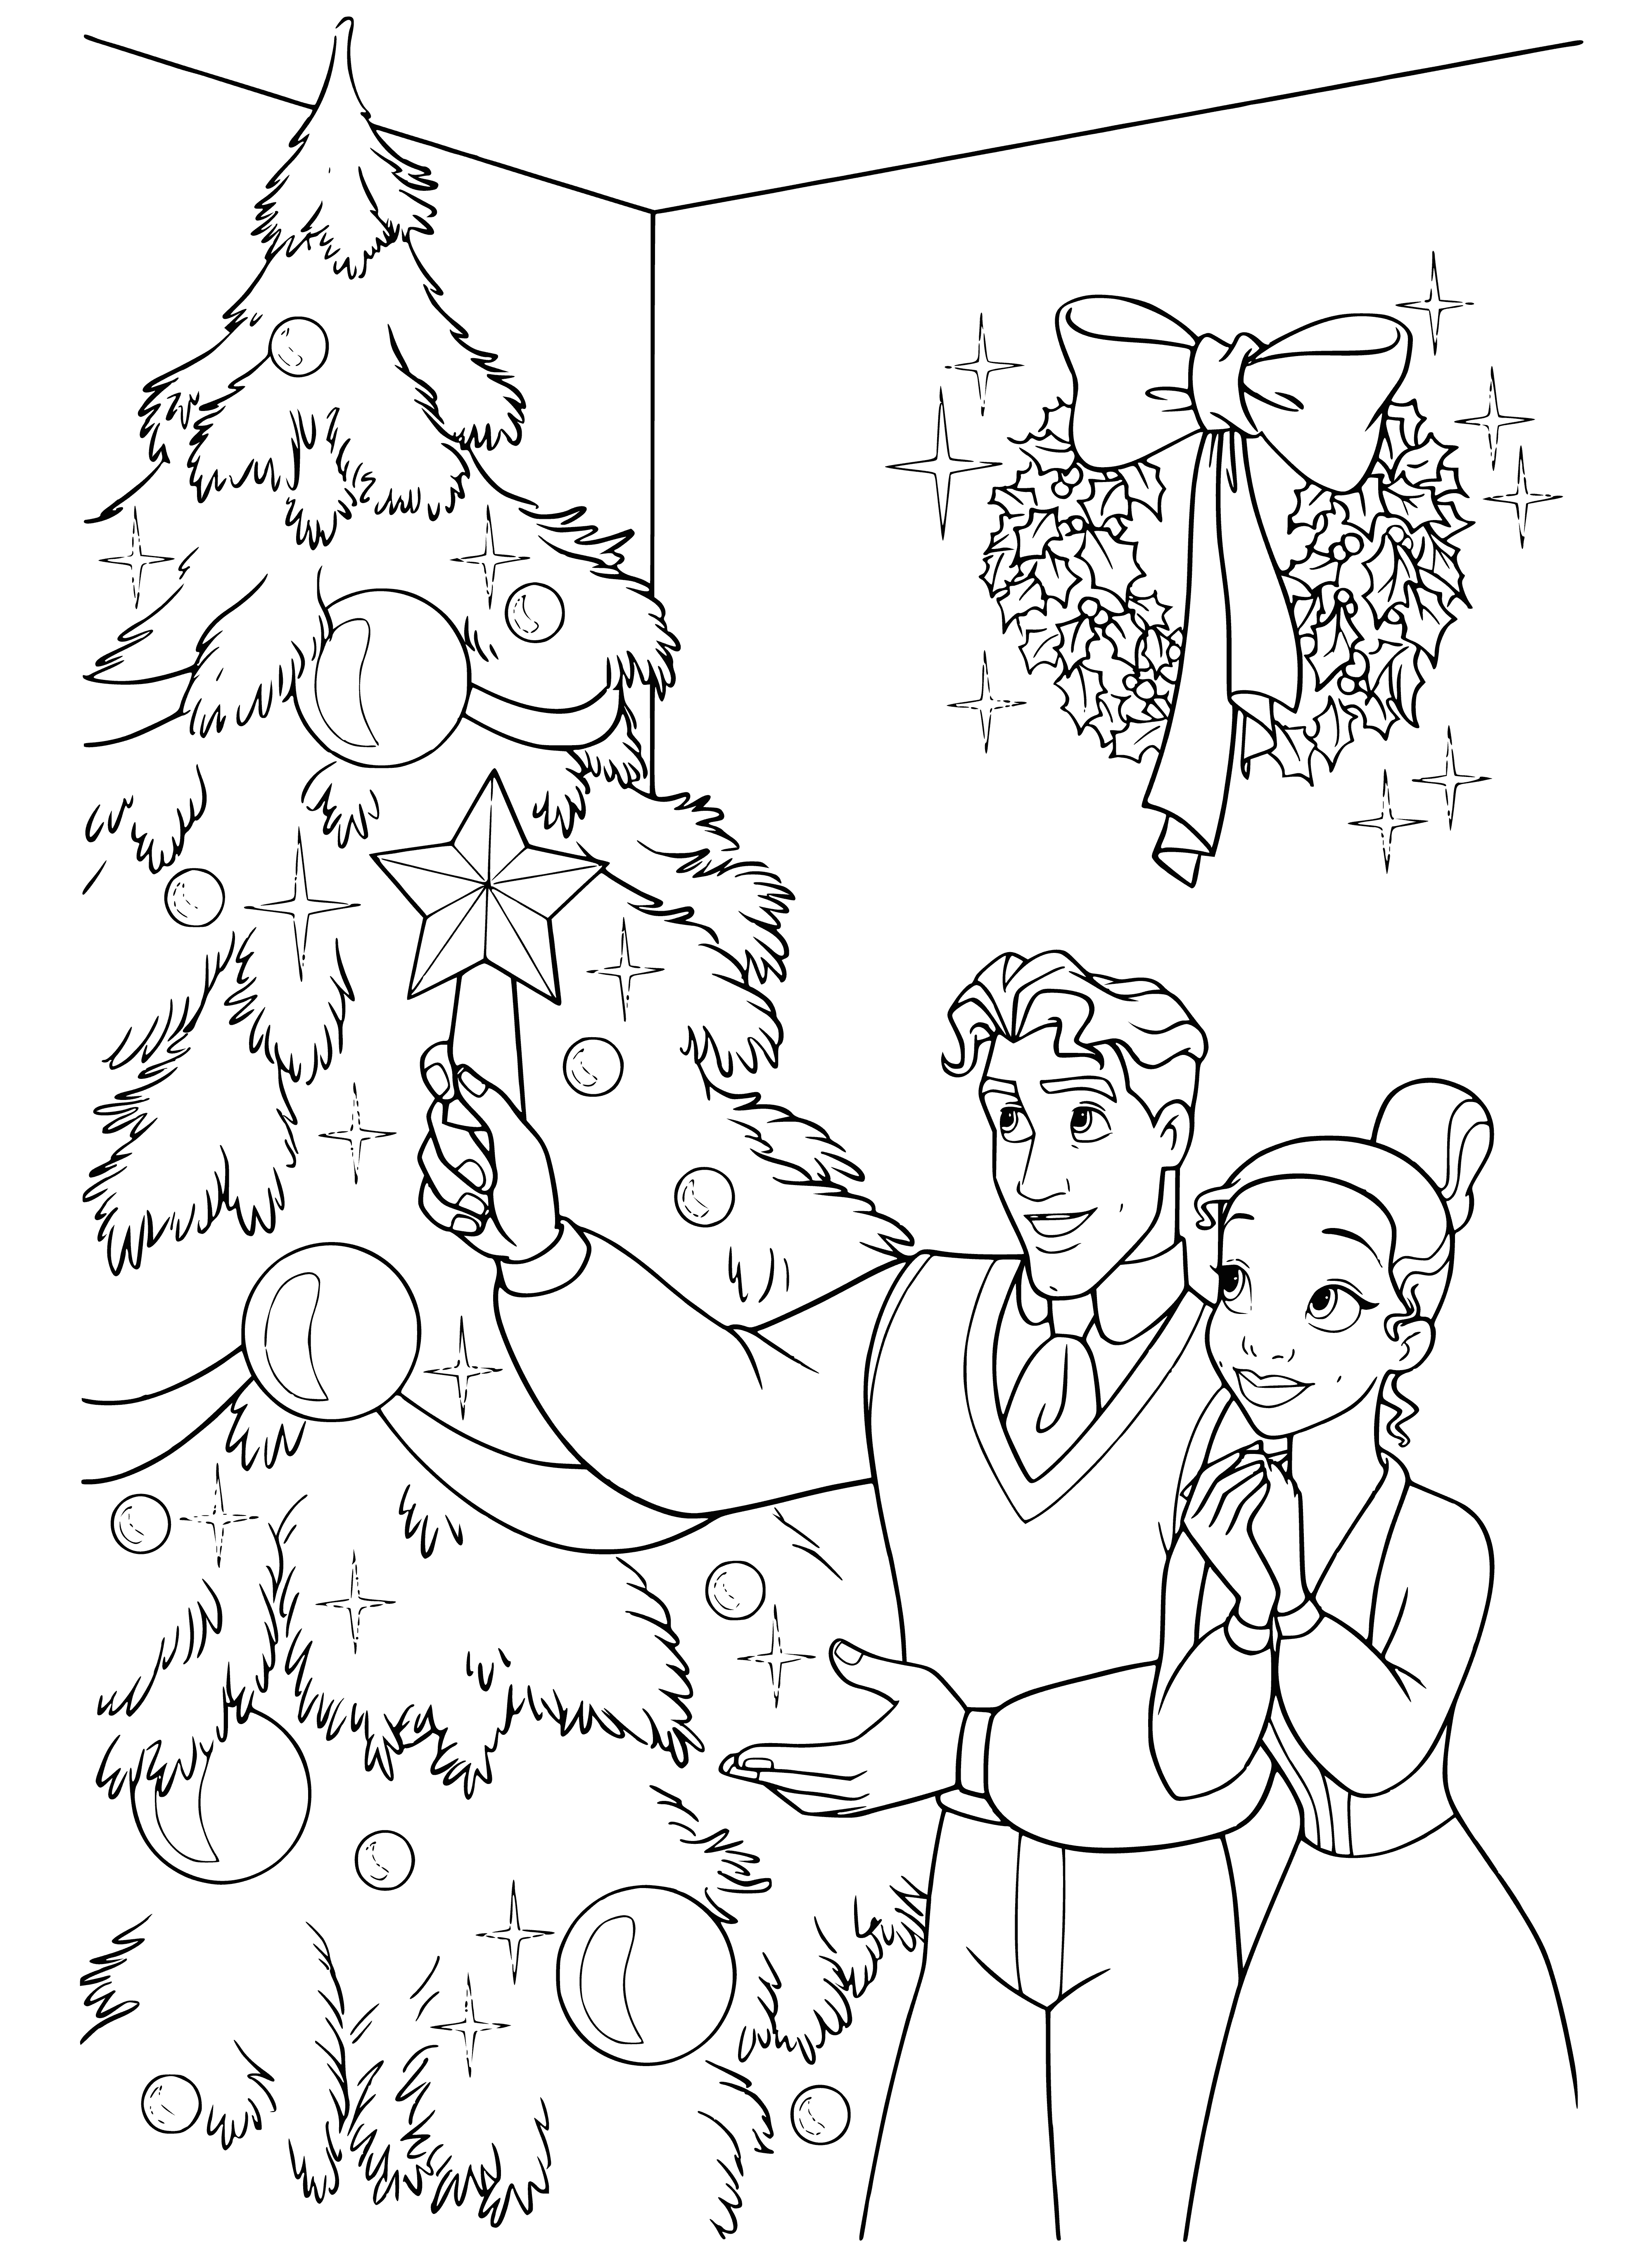 coloring page: Disney princesses and prince rejoice the New Year with champagne & smiles; Tiana in a green dress, prince in a red coat, falling snow.